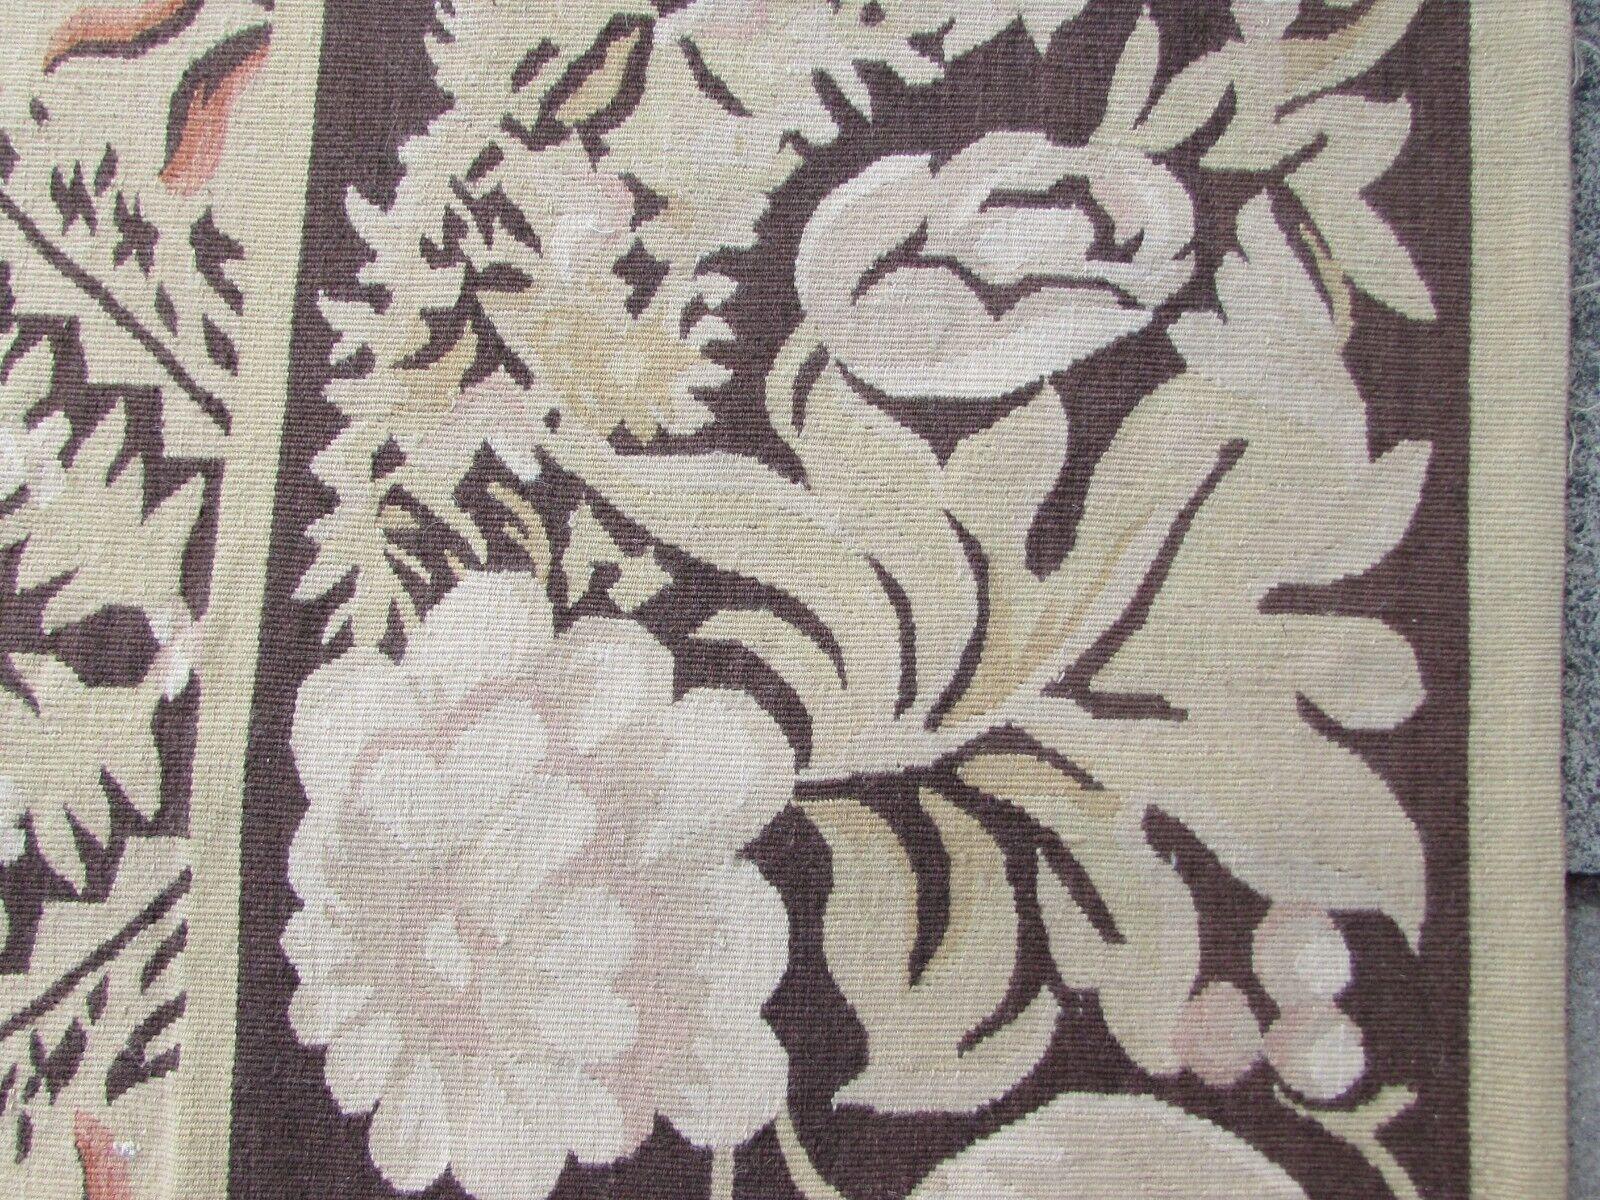 Wool Handmade Vintage French Aubusson Flatweave Rug 7.9' x 9.8', 1970s, 1Q41 For Sale